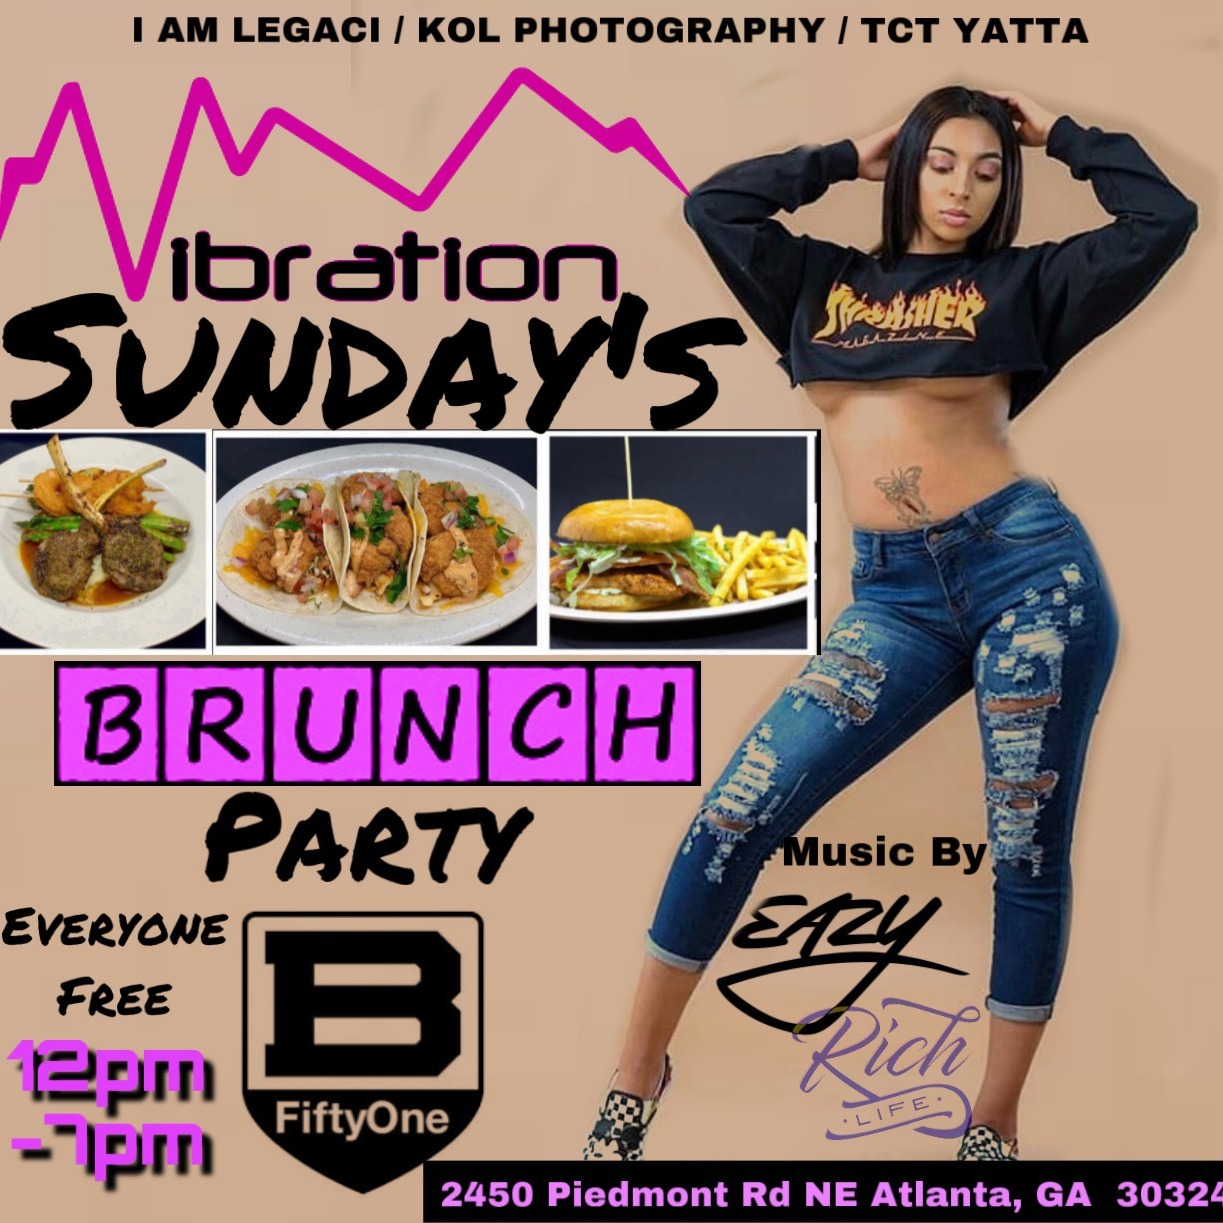 Vibrations Sundays Brunch & Day Party Everyone Free With Rsvp 